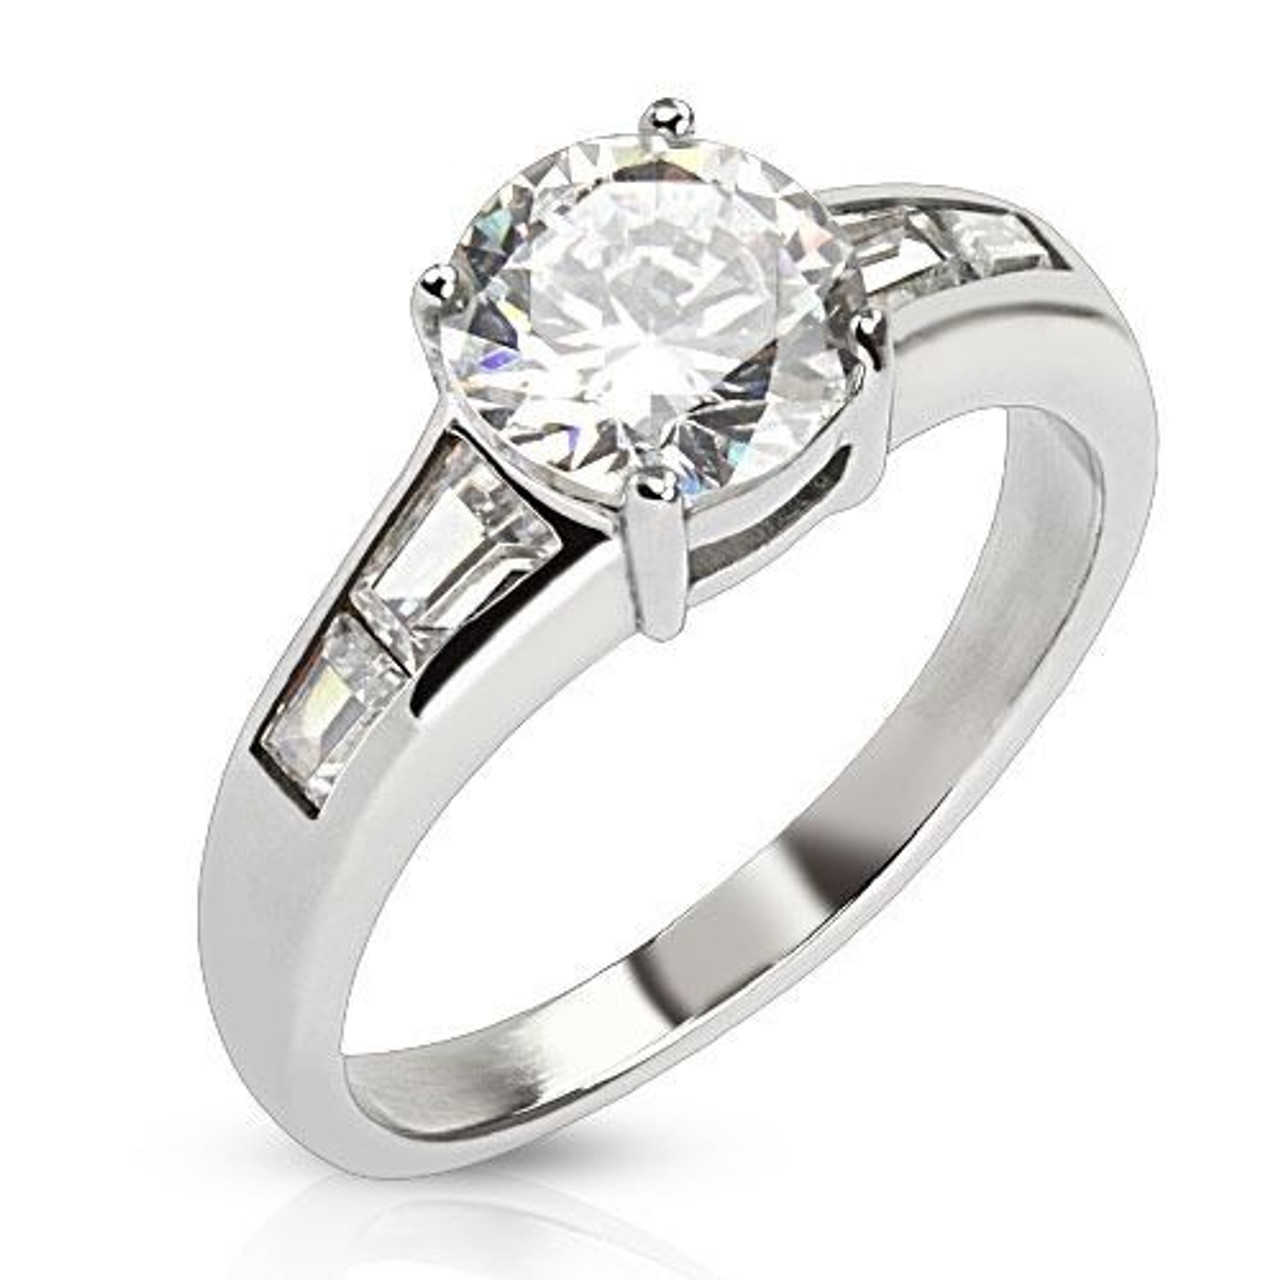 Stainless Steel Round Cut CZ Ring with 